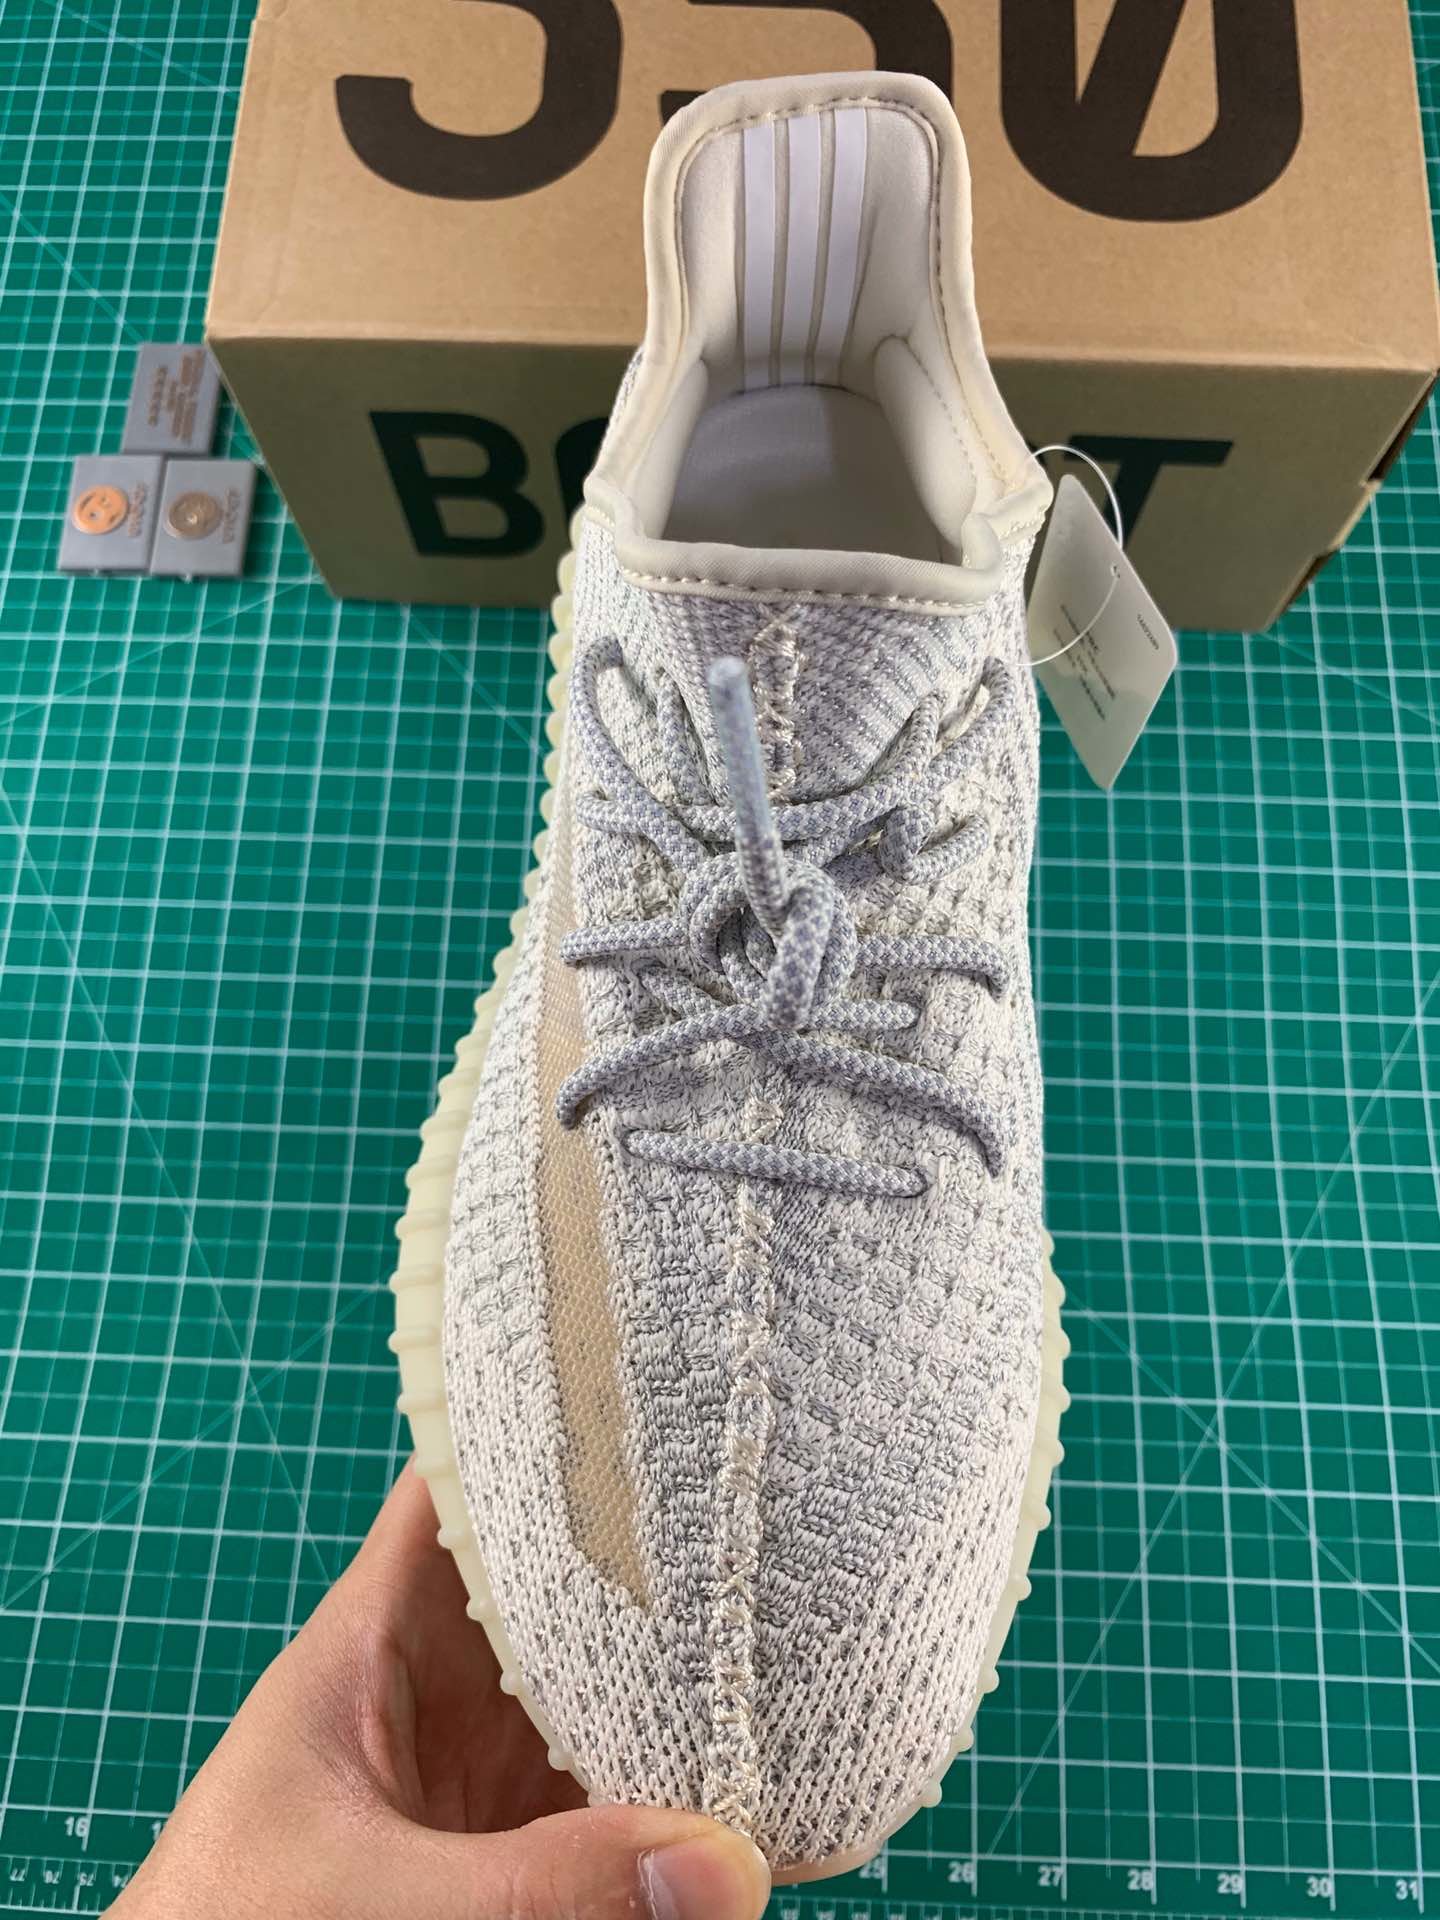 2020 cheap Adidas yeezy Boost 350 V2 Sneakers Unisex # 225172, cheap Adidas Yeezy Shoes, only $99!